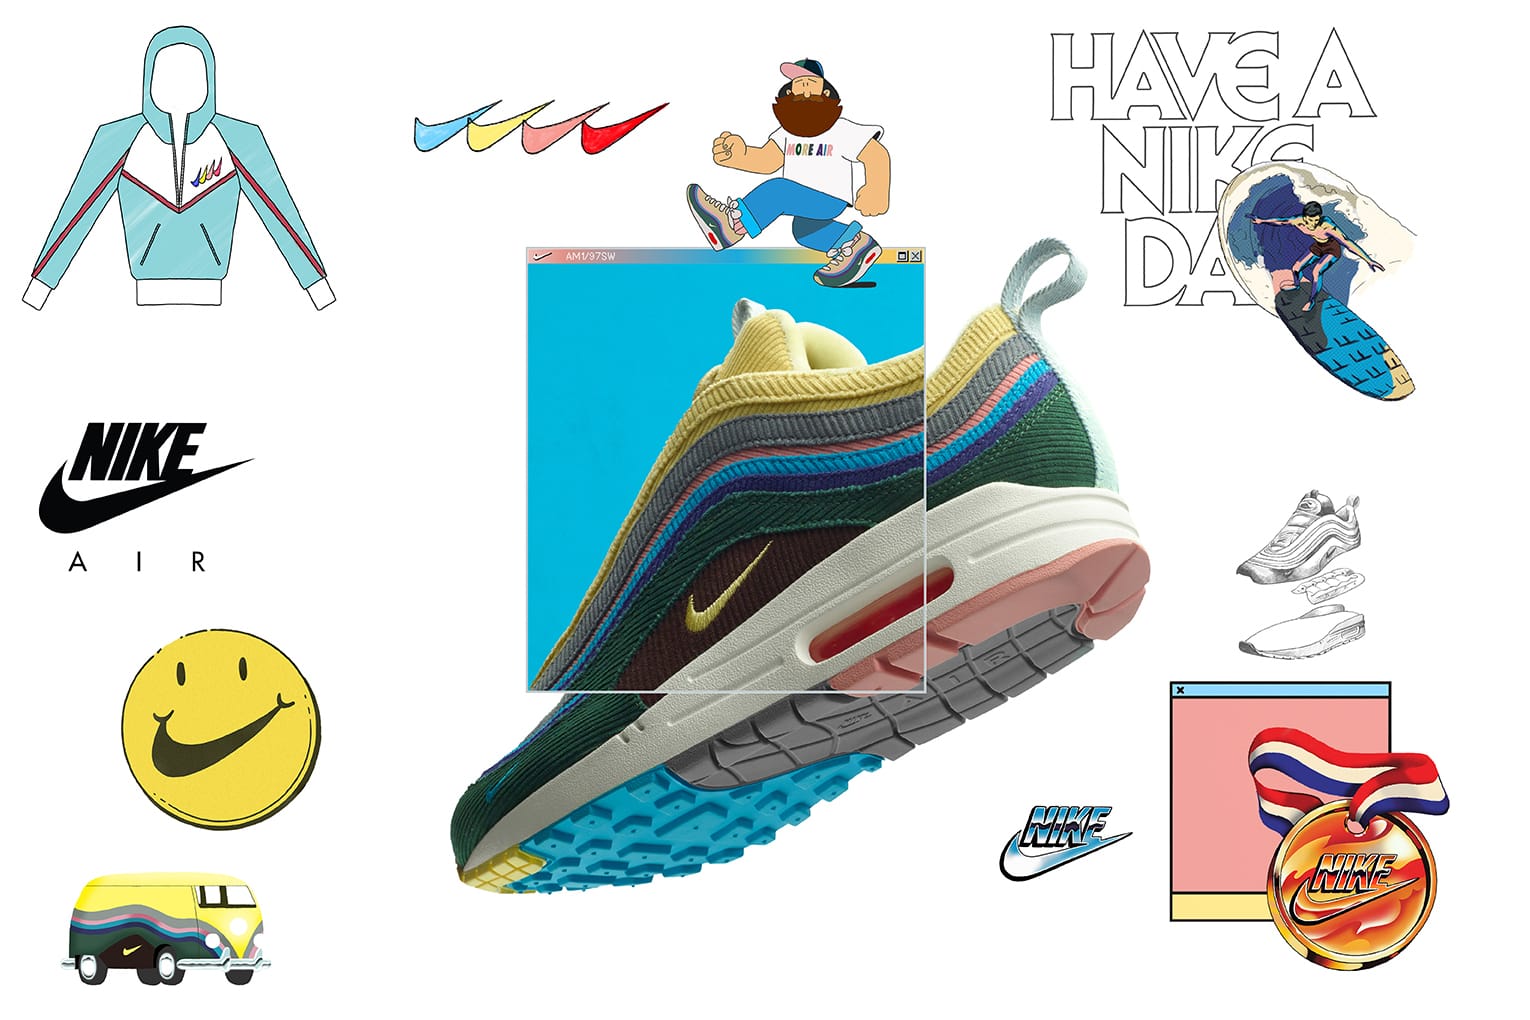 am 97 sean wotherspoon